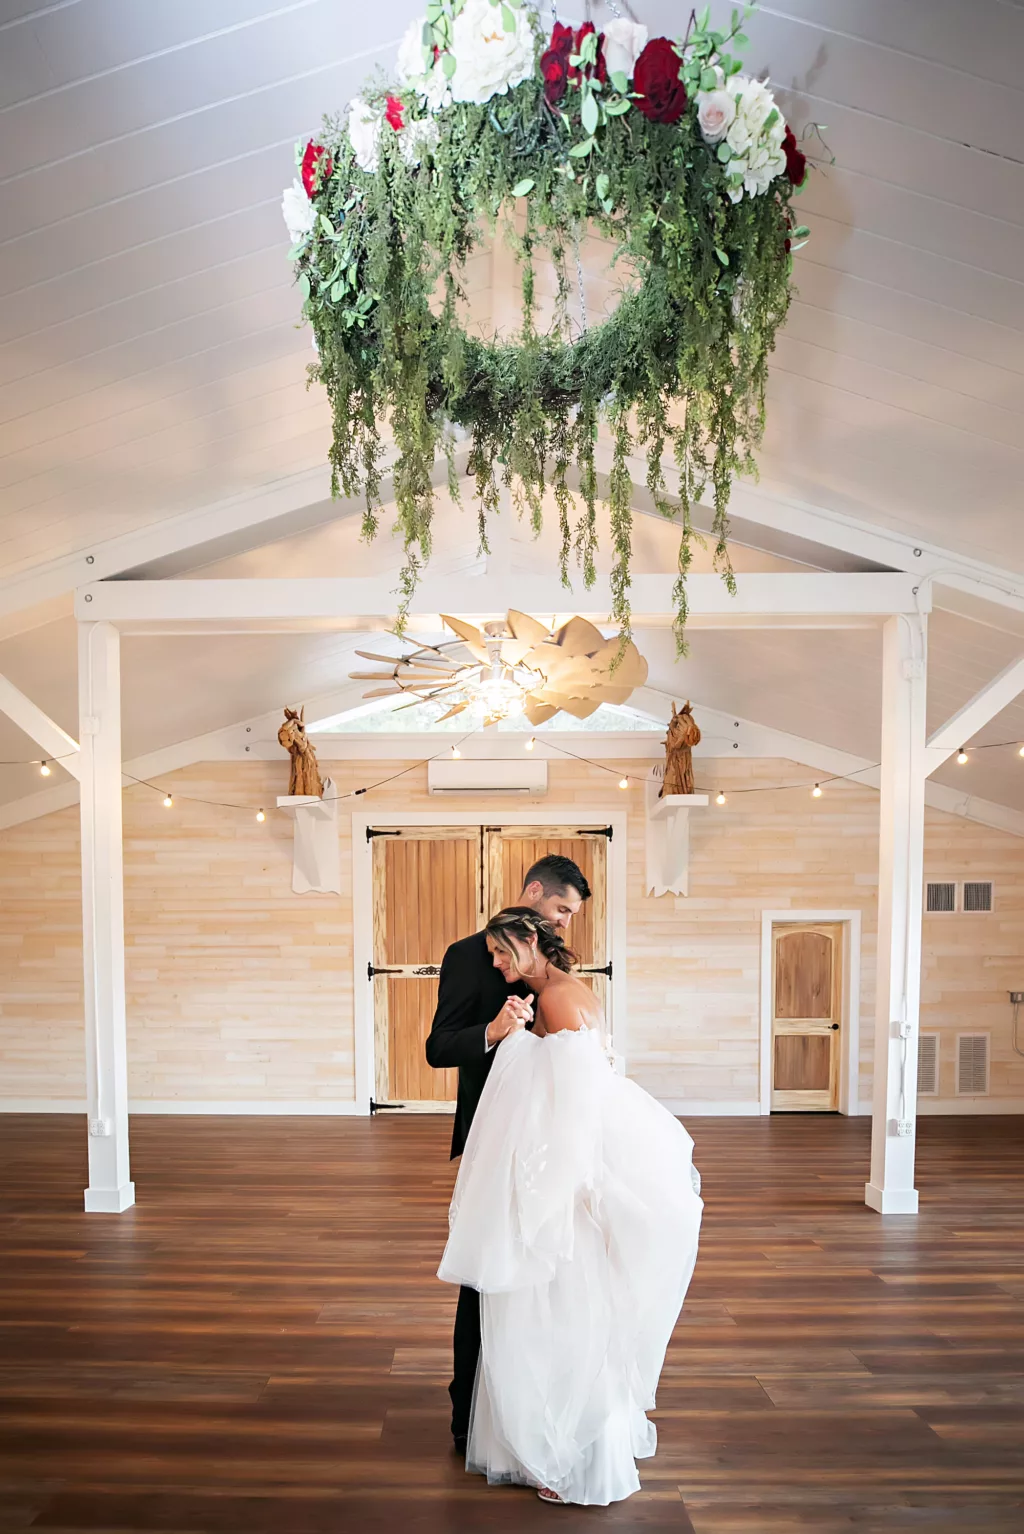 Bride and Groom First Dance | Indoor Modern Barn Reception with Floral Greenery Suspended Chandelier | Brooksville Event Venue Legacy Lane Weddings | Photographer Limelight Photography